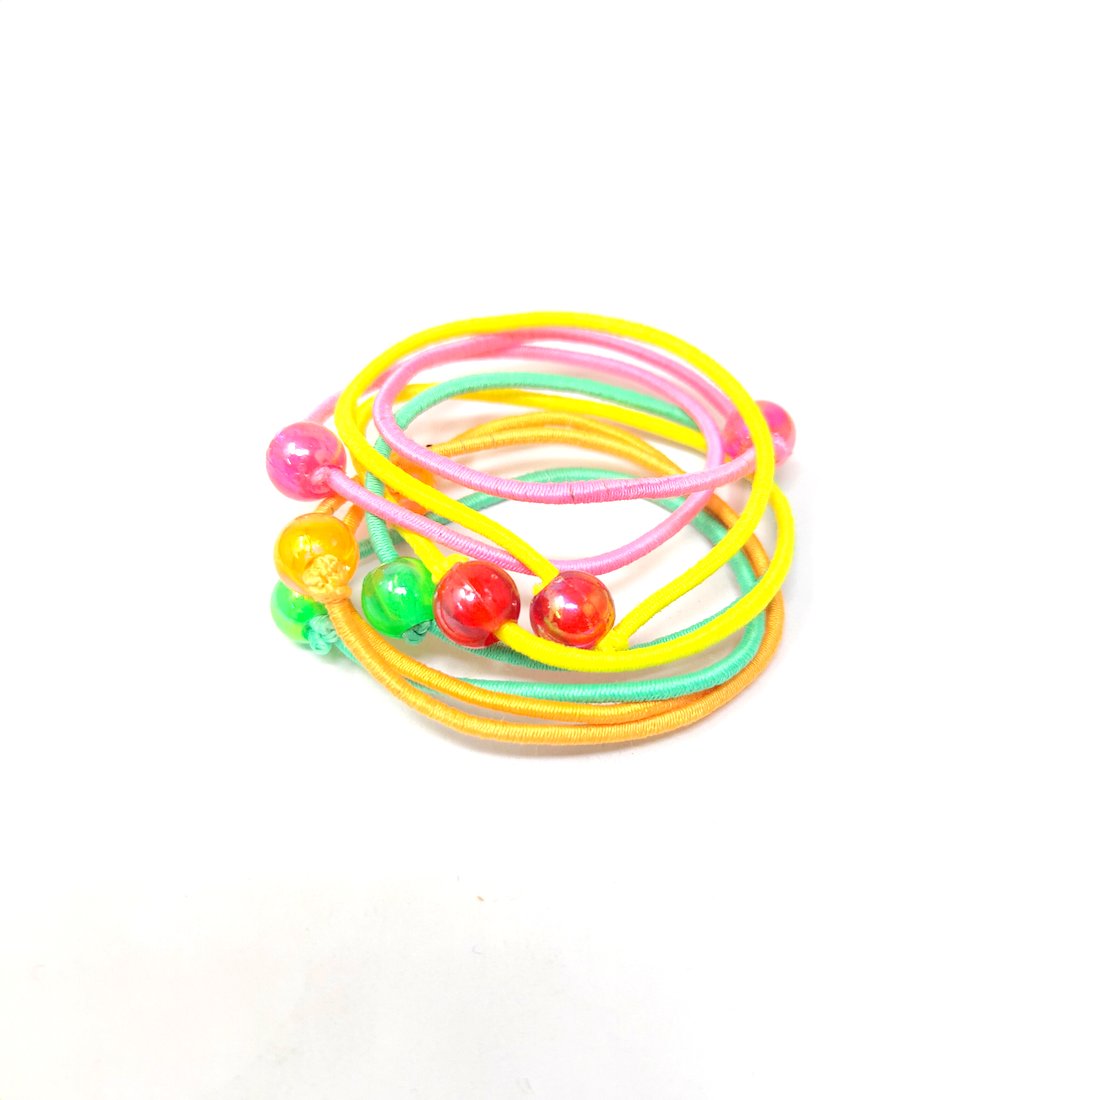 Anokhi Ada small size Elastic Rubber with Multi-Colour Beads for Girls and Women (15-26 Ponytail Holders, 8 Pcs Assorted Colour Rubber)